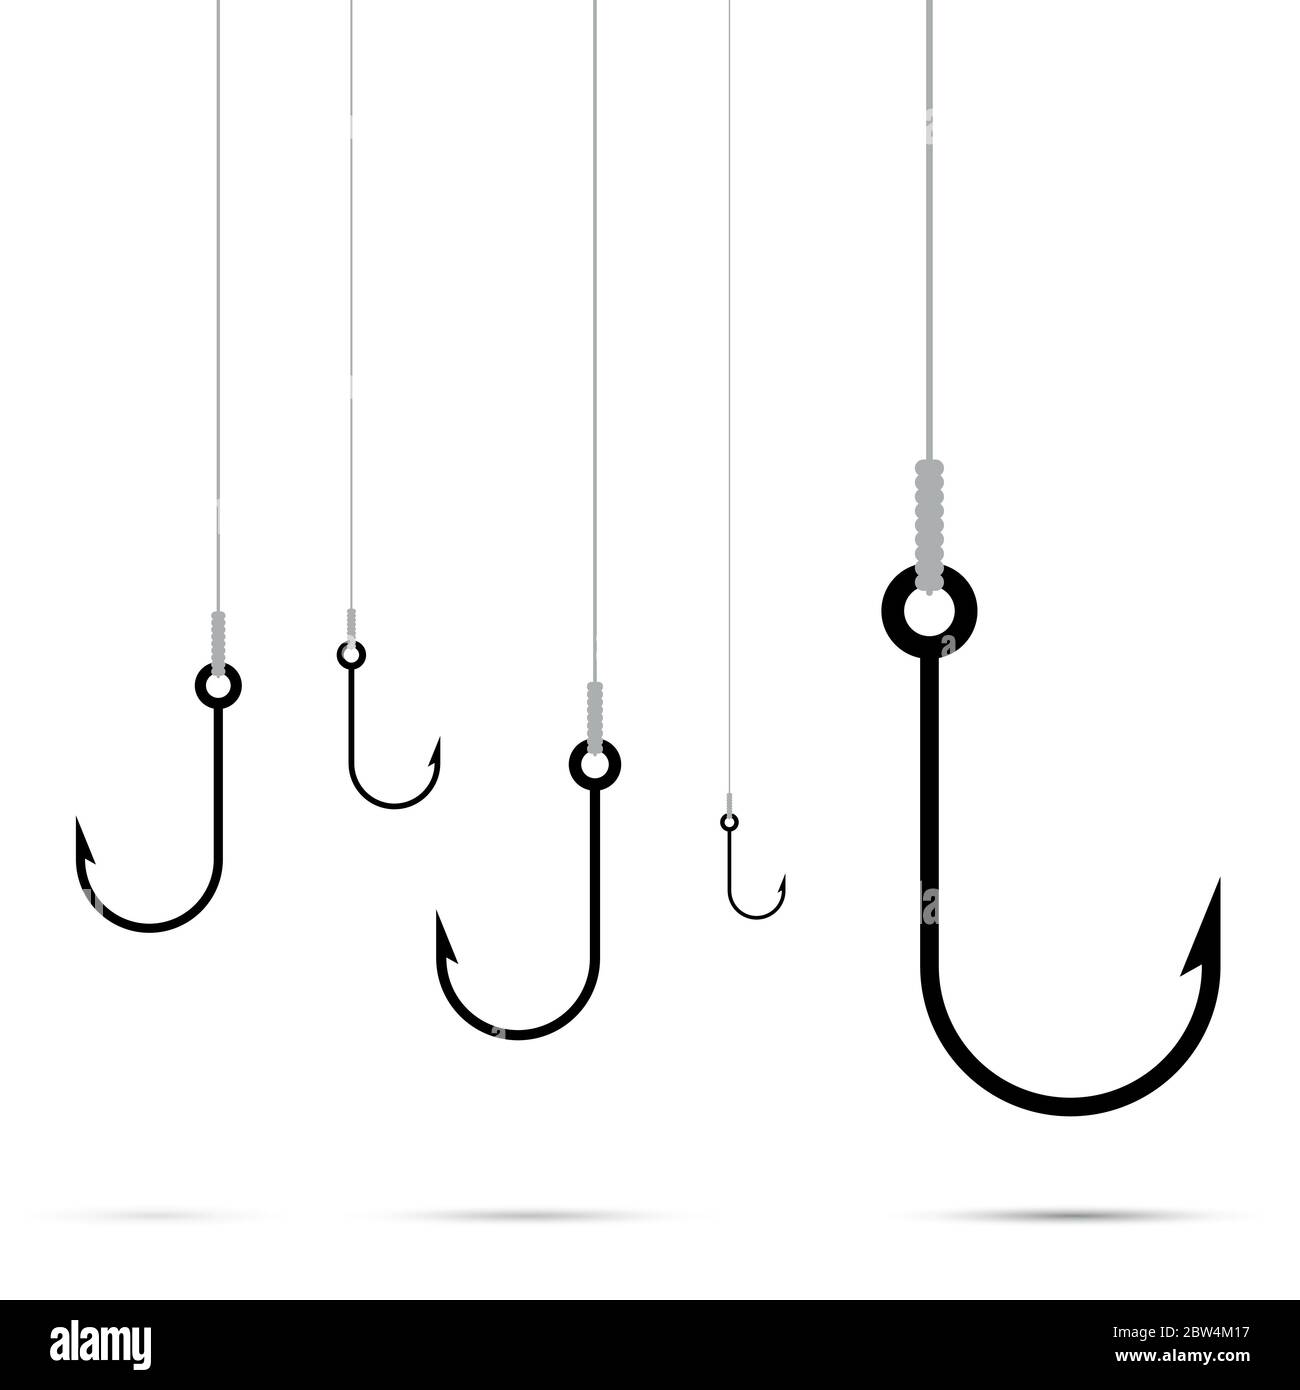 fishing hook with rope vector illustration background Stock Vector